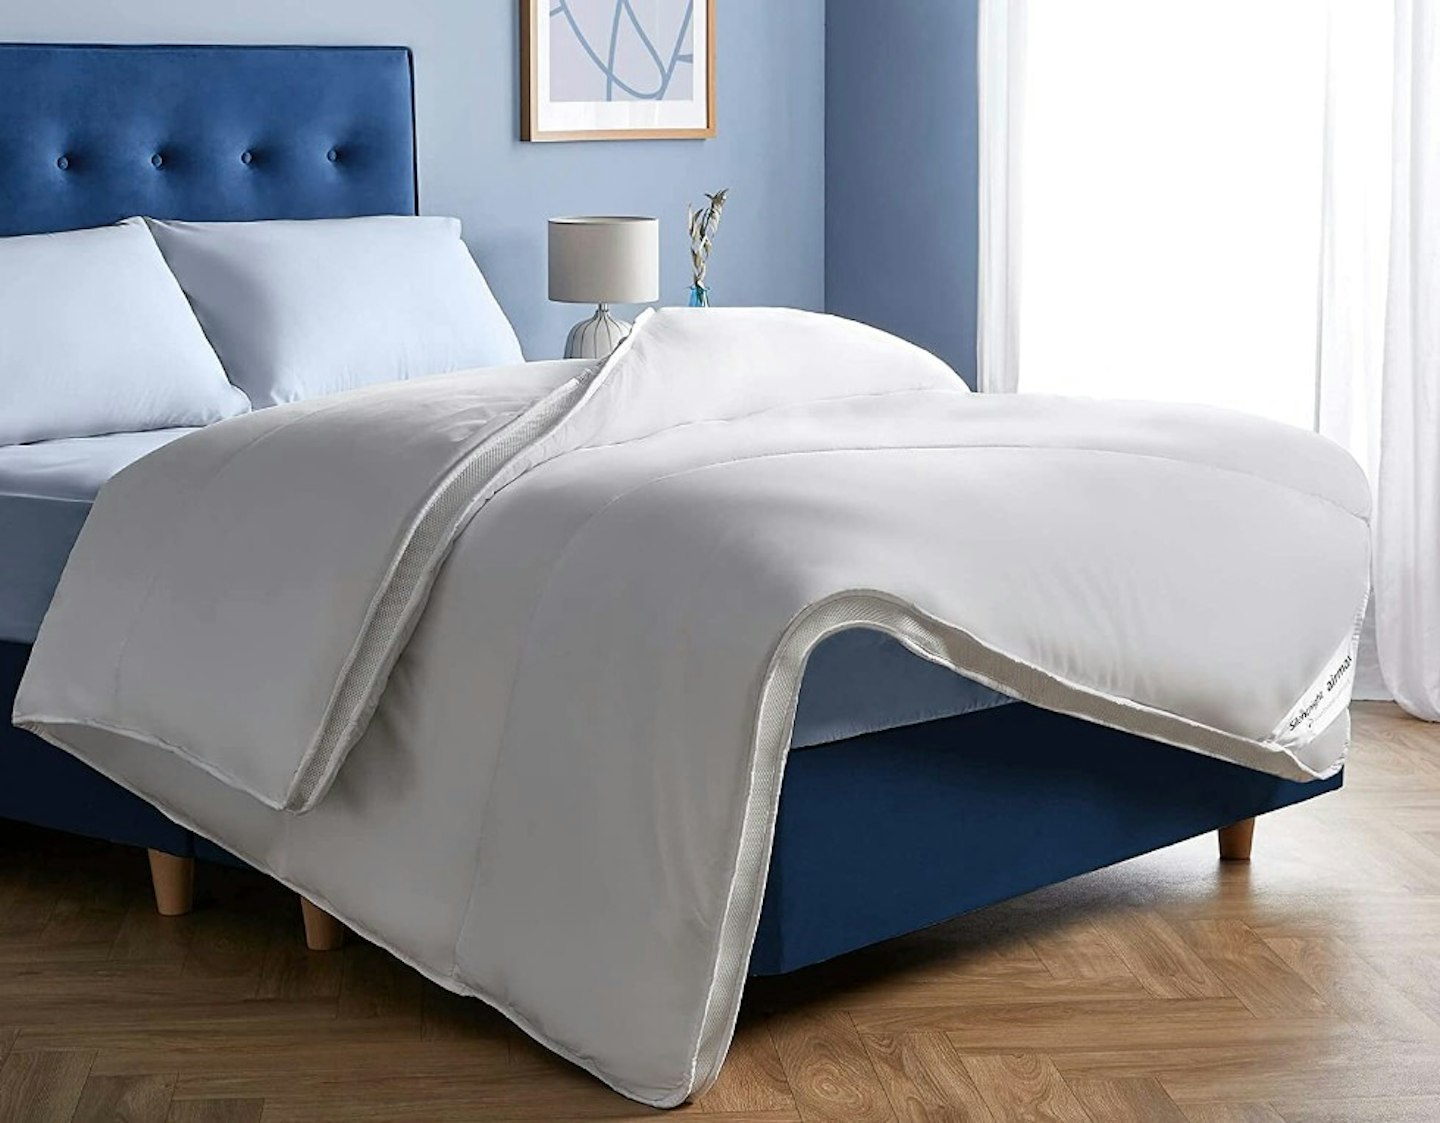  Silentnight Airmax Anti Allergy Single Duvet – Breathable and Hypoallergenic 